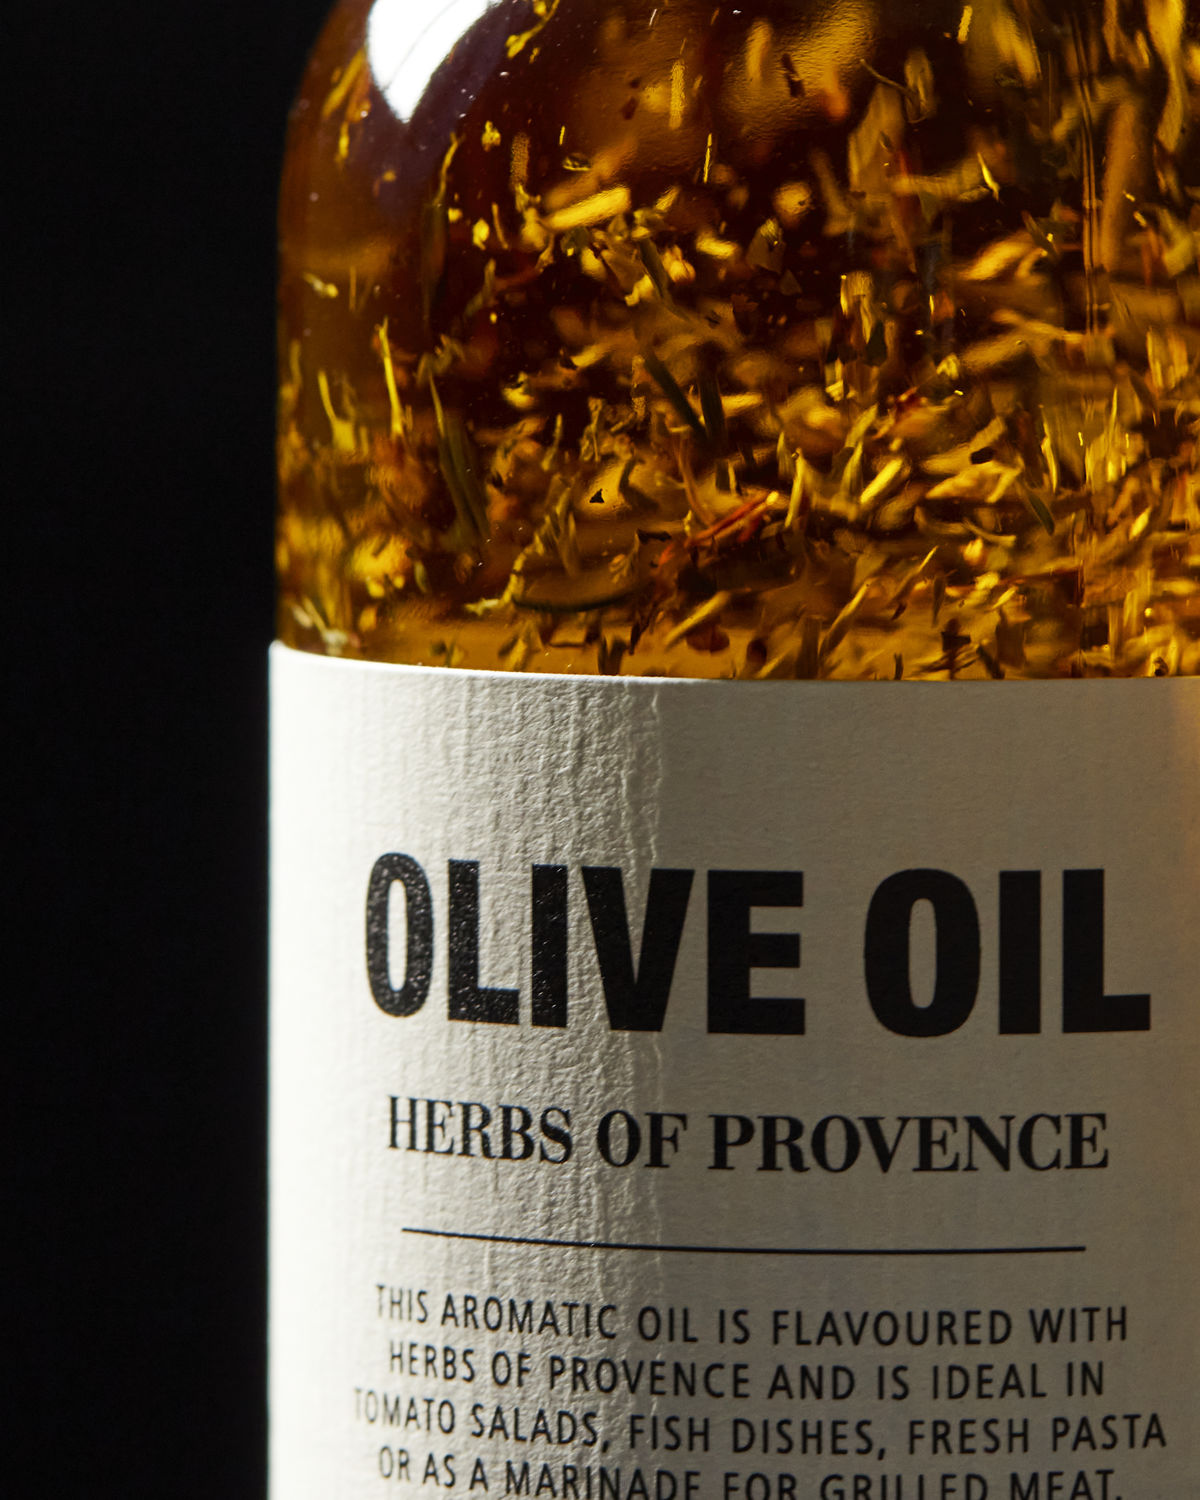 Olive oil with Herbes de Provence